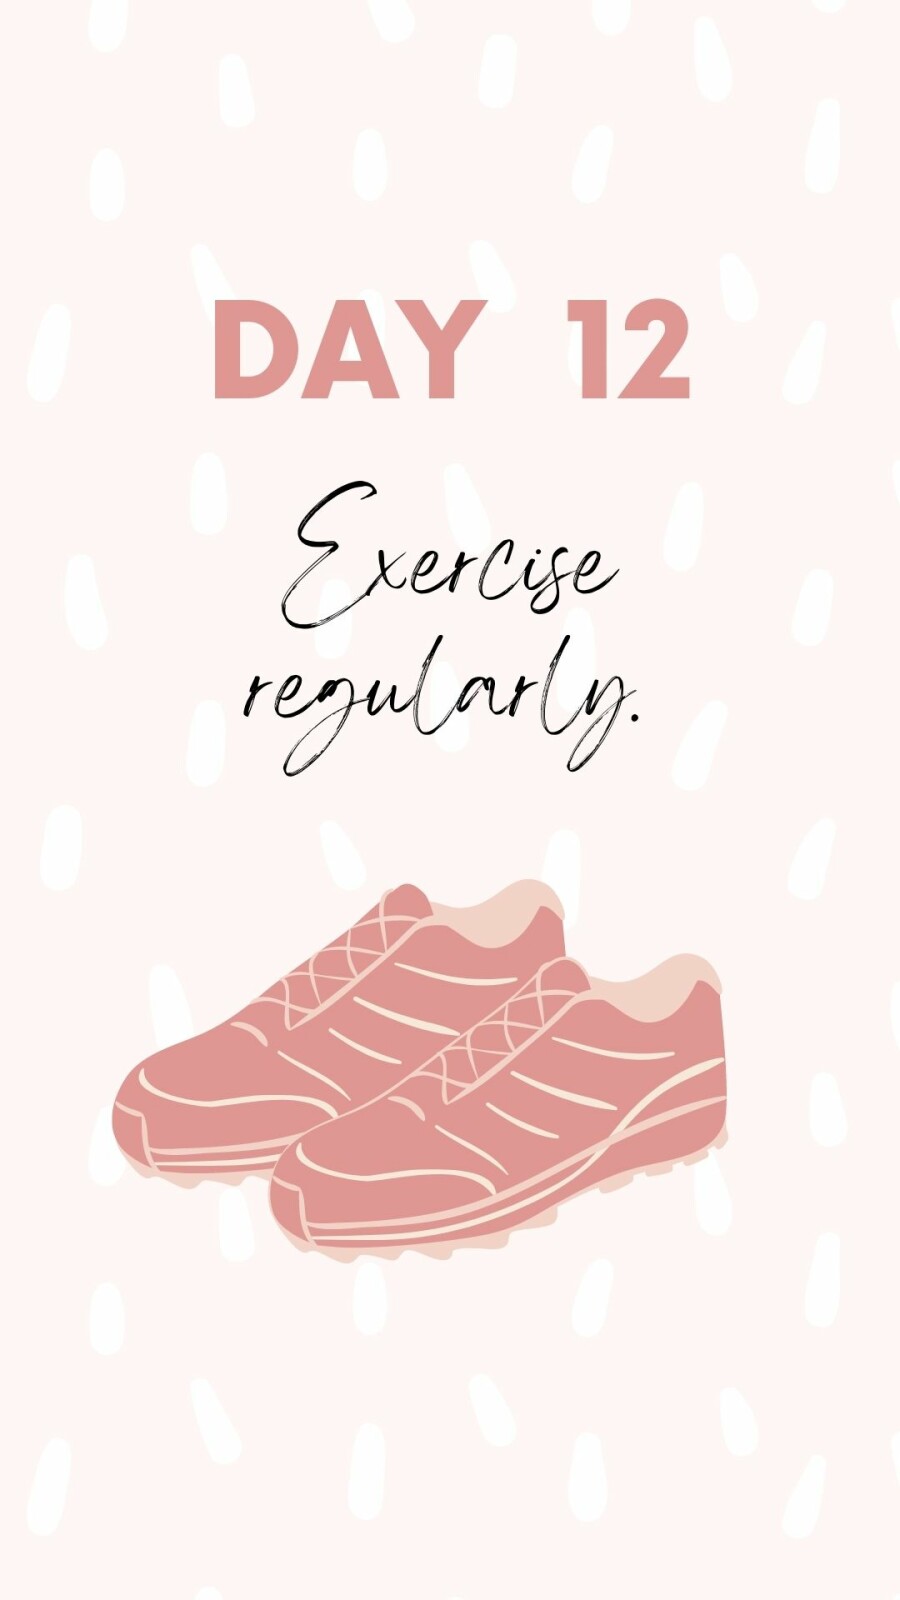 Self Love 101 Exercise regularly - Day 12